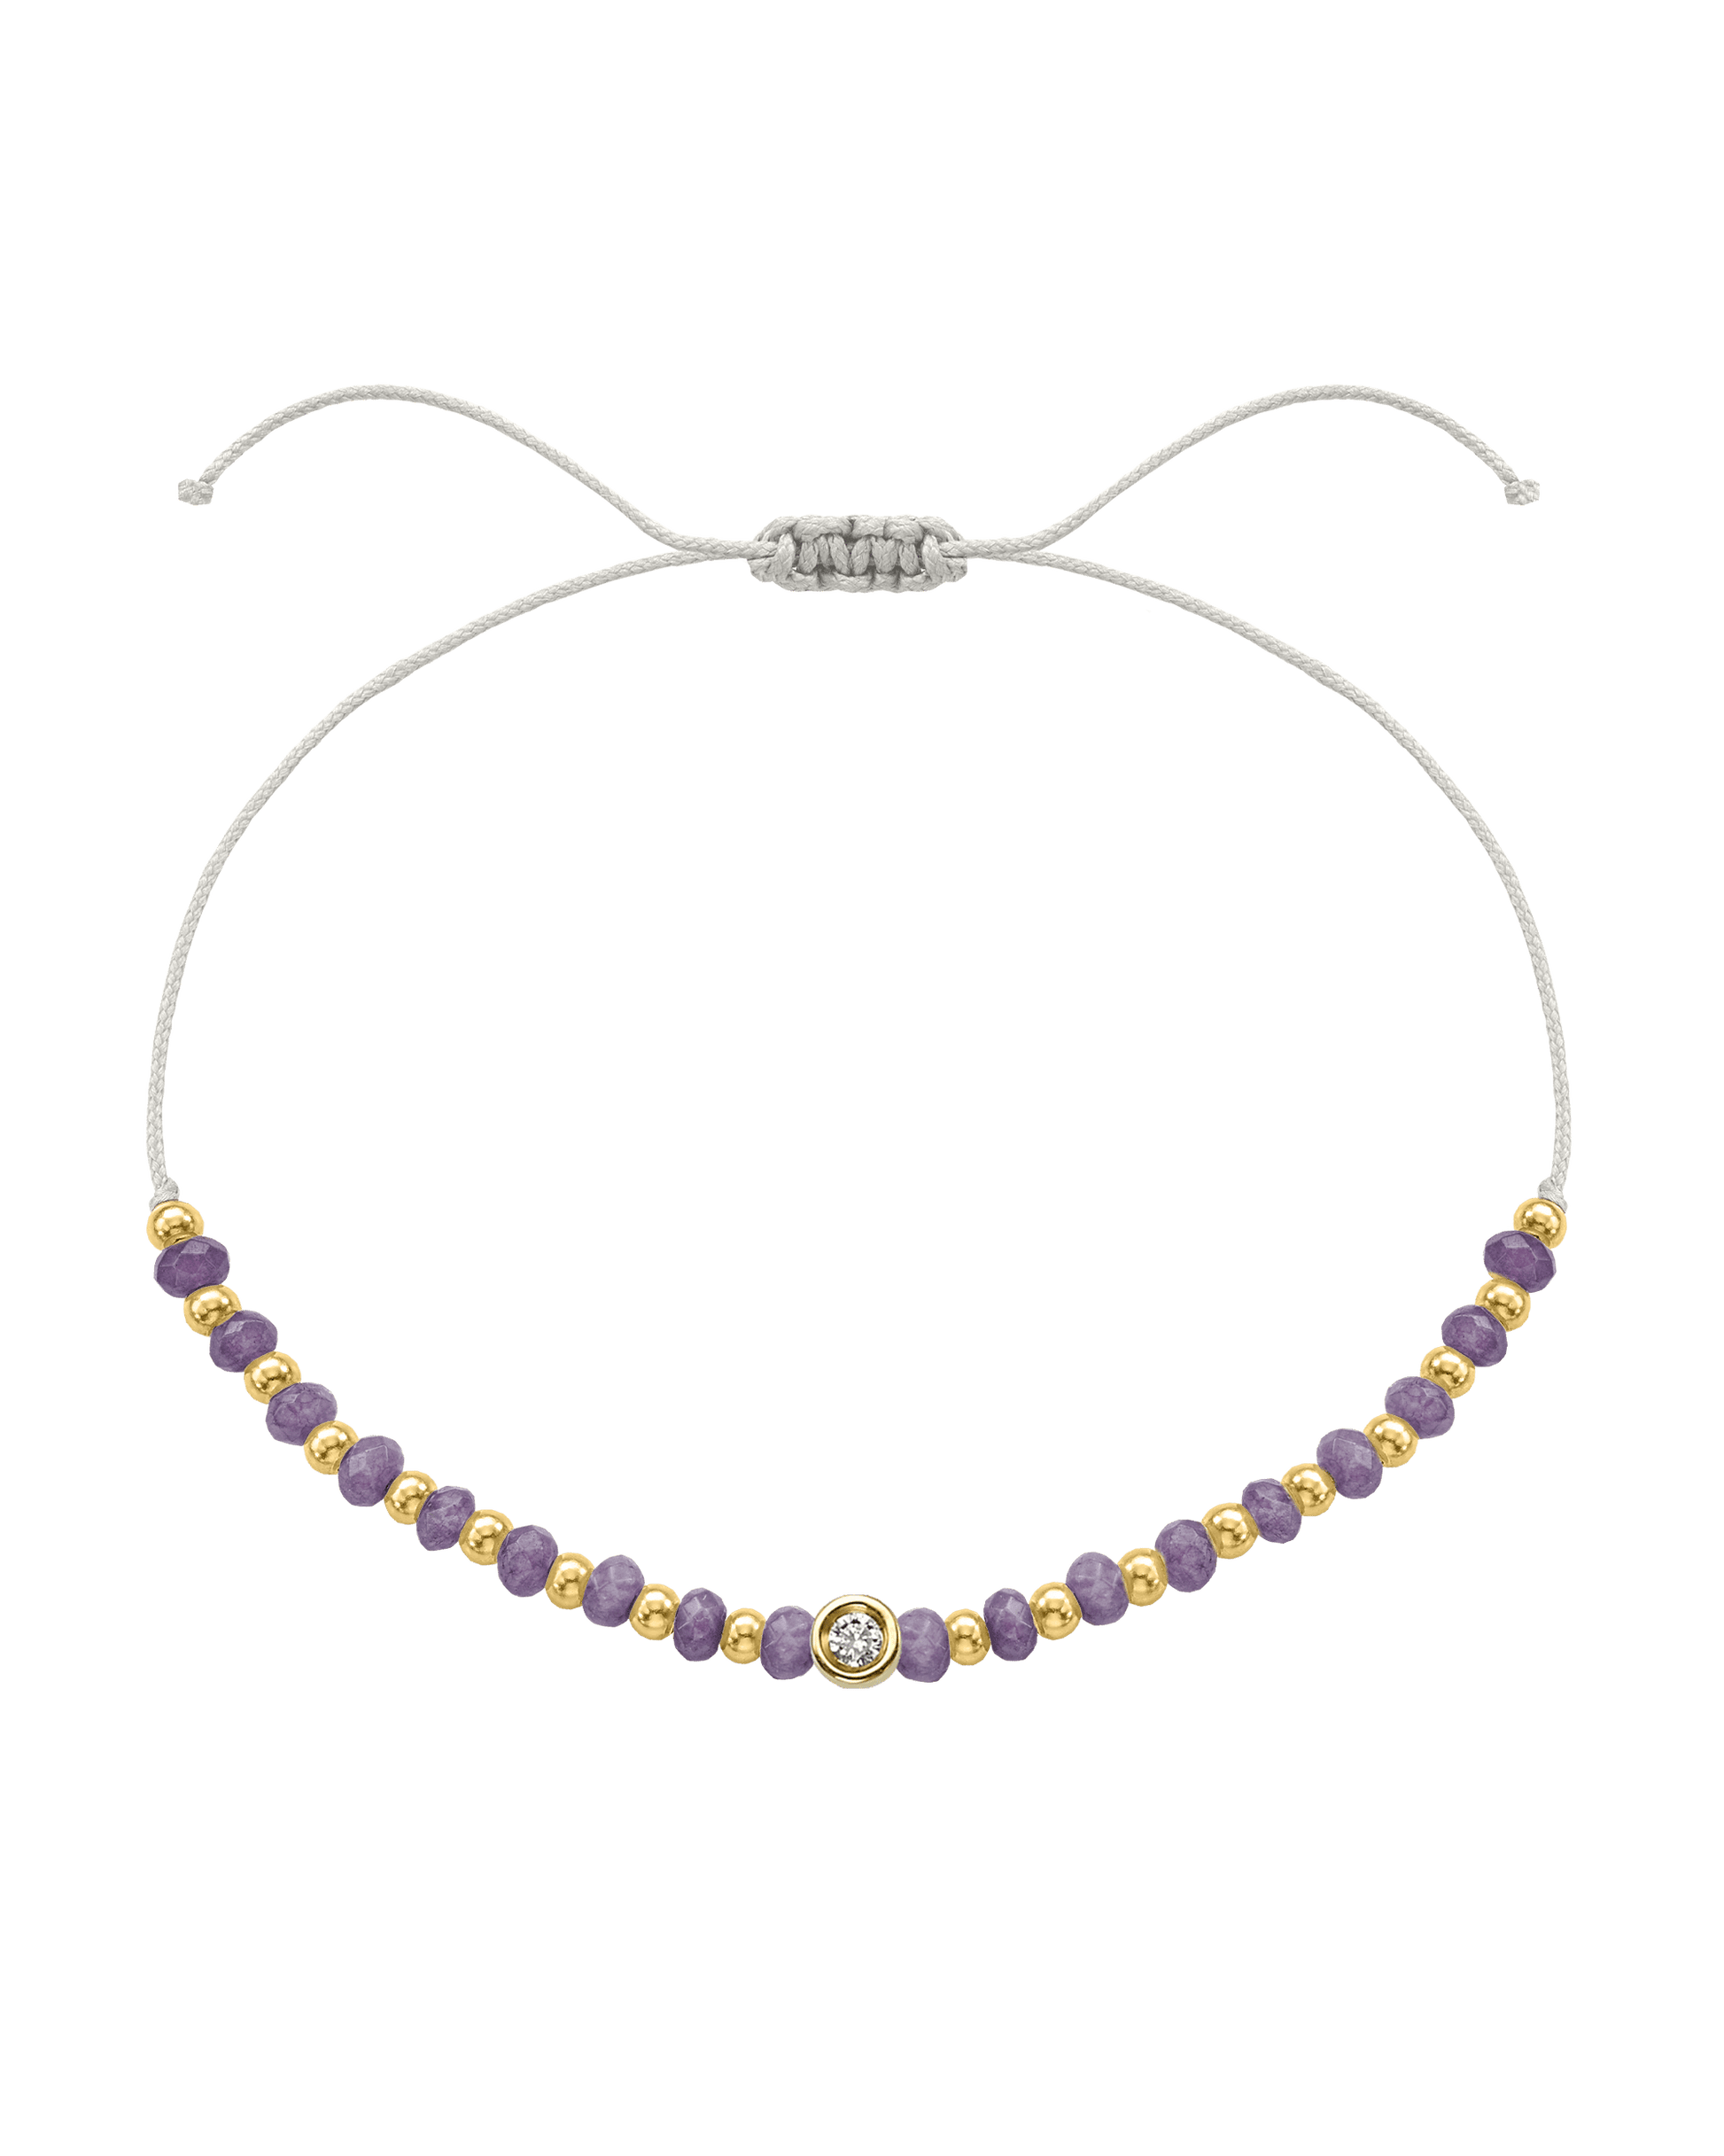 Amethyst Gemstone String of Love Bracelet for Tranquility - 14K Yellow Gold Bracelets magal-dev Pearl Small: 0.03ct 